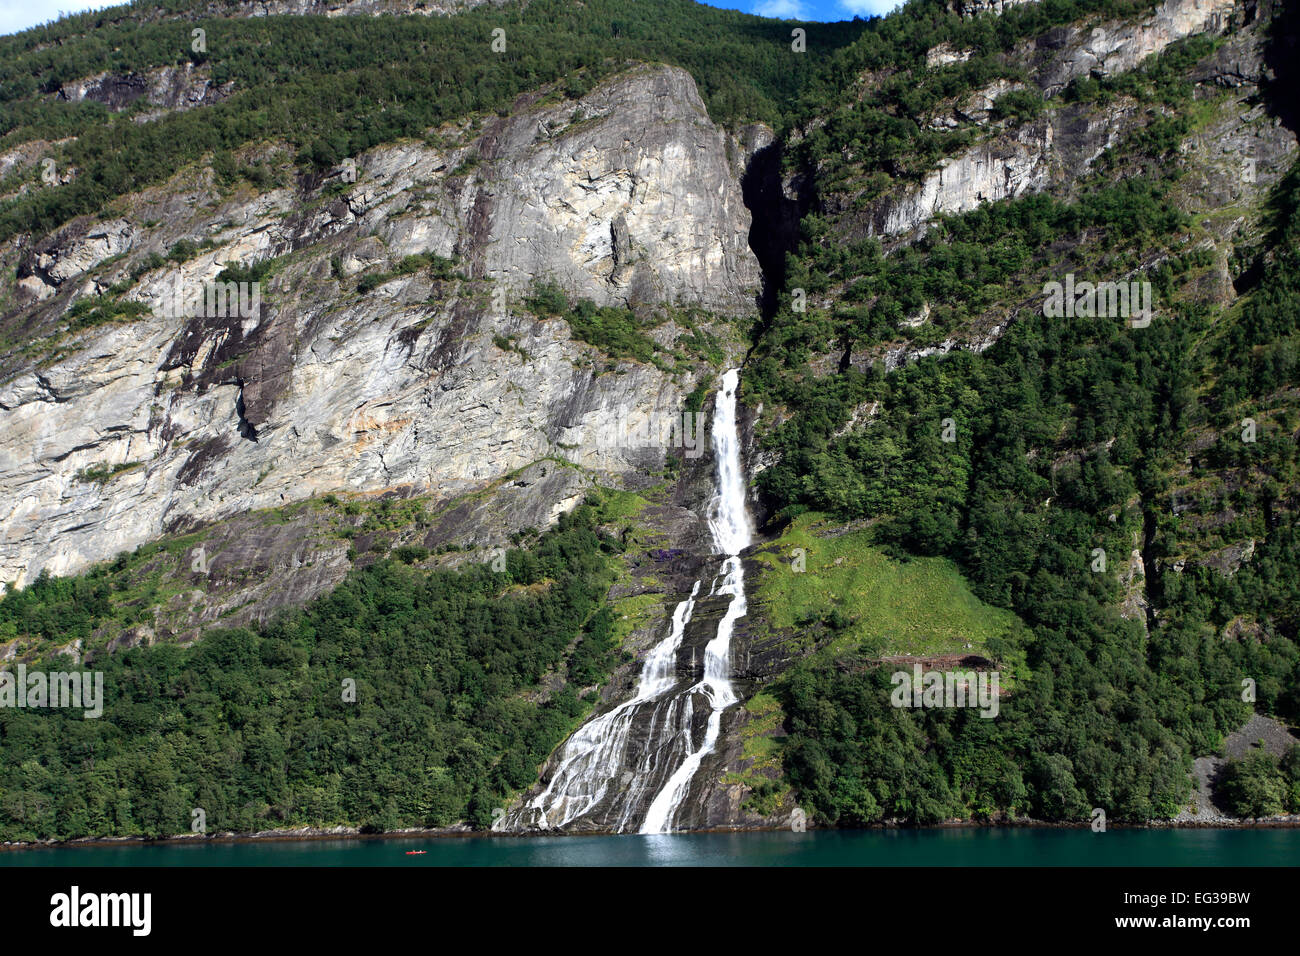 The Suitor waterfall in Geirangerfjord, UNESCO World Heritage Site, UNESCO, Sunnmøre region, Møre og Romsdal county, Western Nor Stock Photo